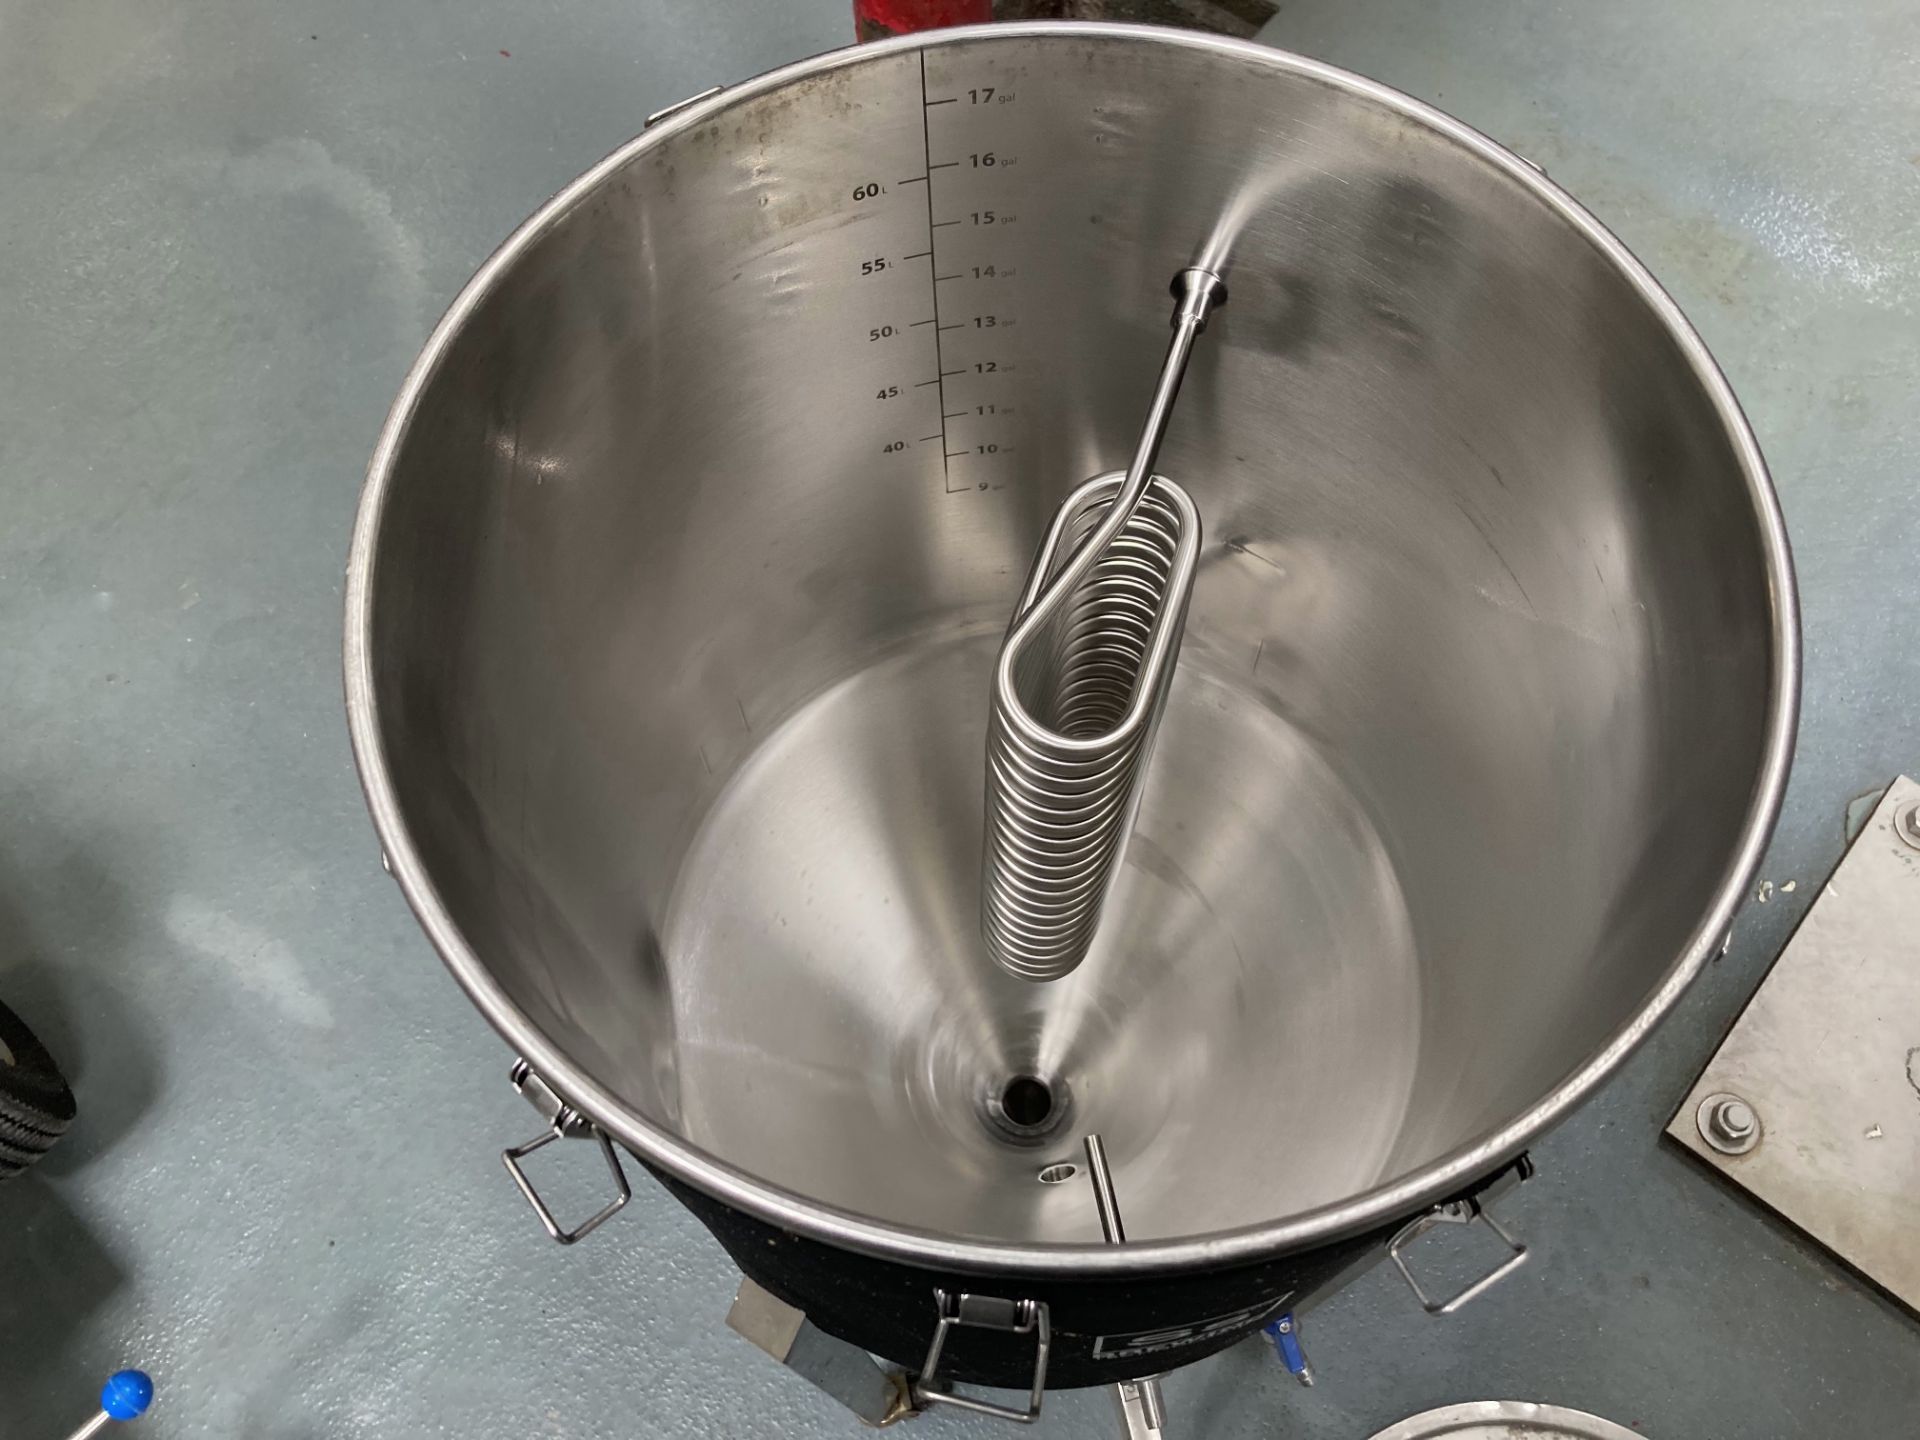 Ss Brewing stainless steel insulated batch vessel with caster, 17 gallon  Rigging fee of __$50__ - Image 2 of 2